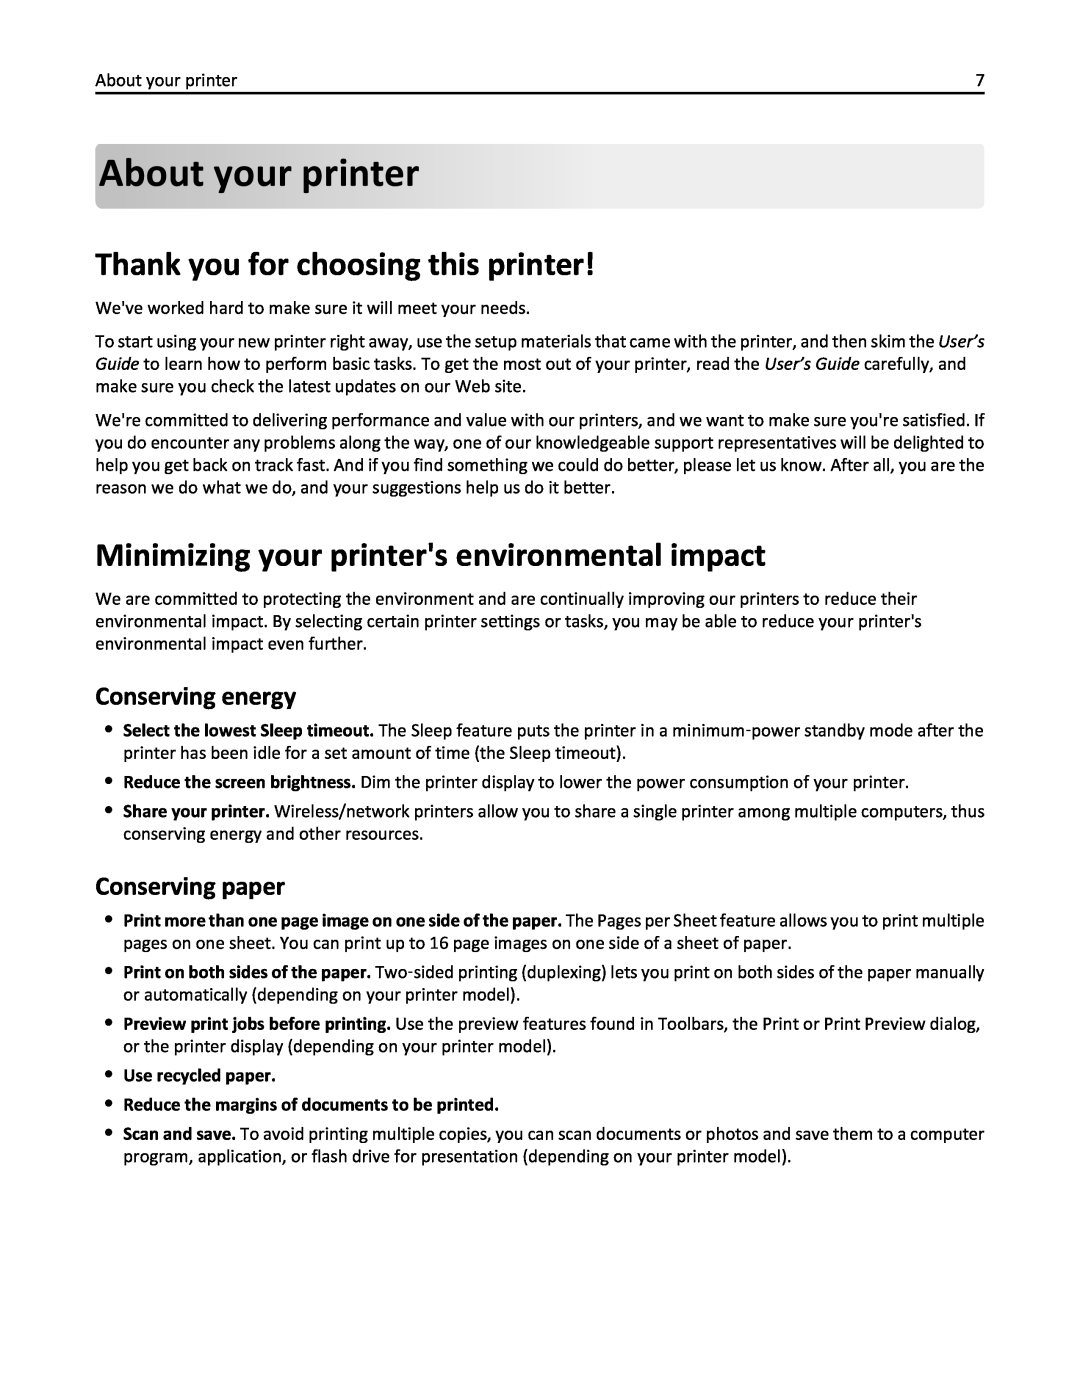 Lexmark PRO4000 About yourprinter, Thank you for choosing this printer, Minimizing your printers environmental impact 